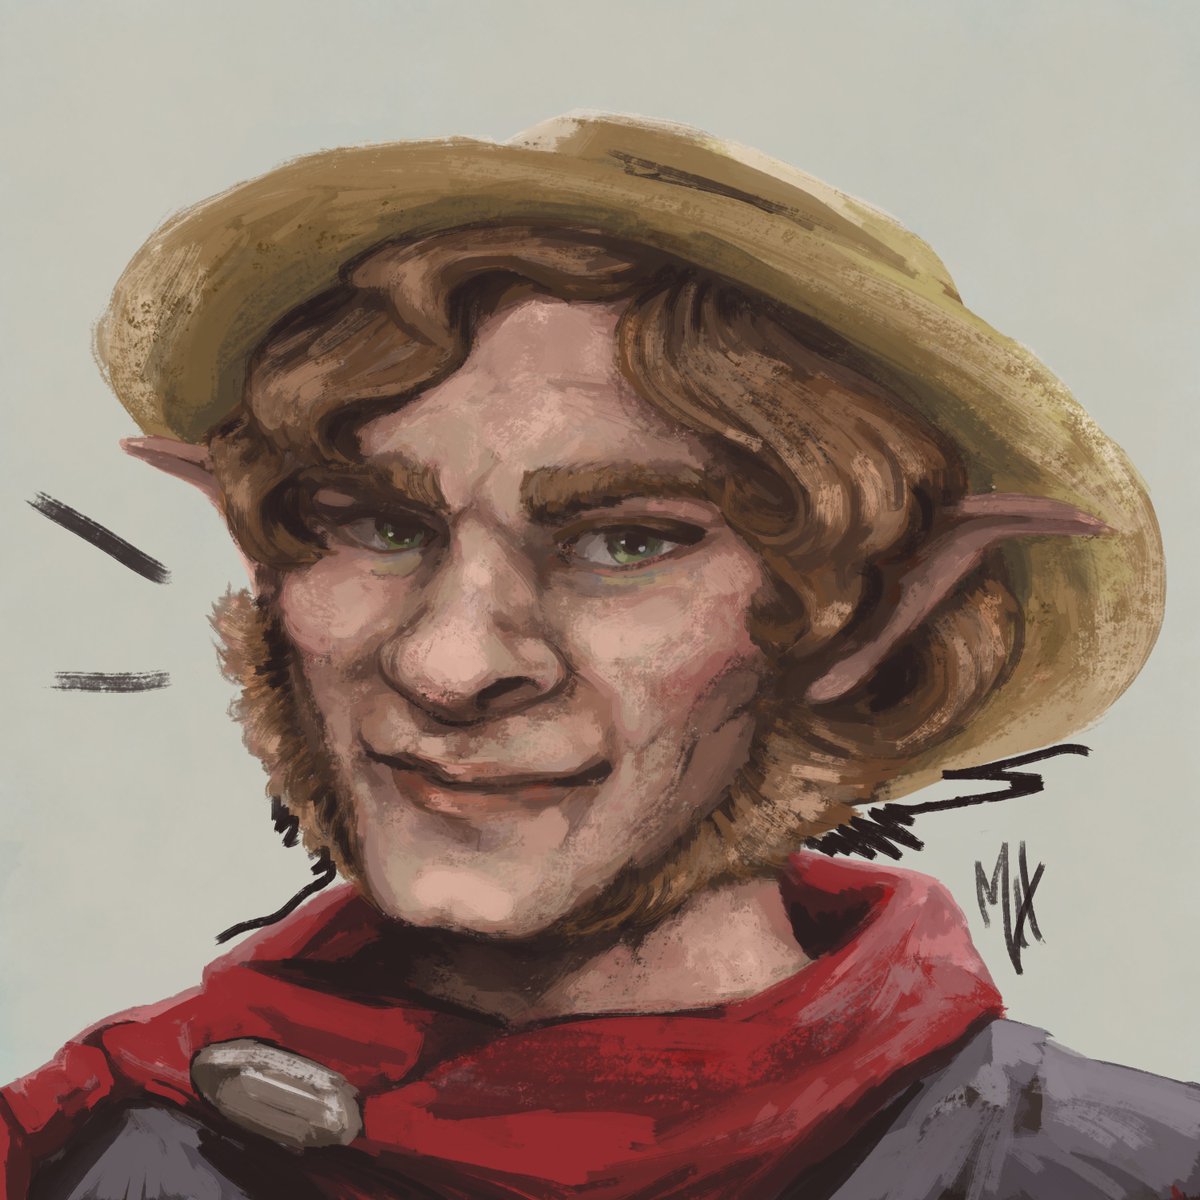 My first preview for comissionable character portraits for games like and including Dungeons and Dragons.

feel free to check out my print store meanwhile :)
shop.spreadshirt.se/sadochart/

#originalcharacter #halfling #dndart #comissionportrait